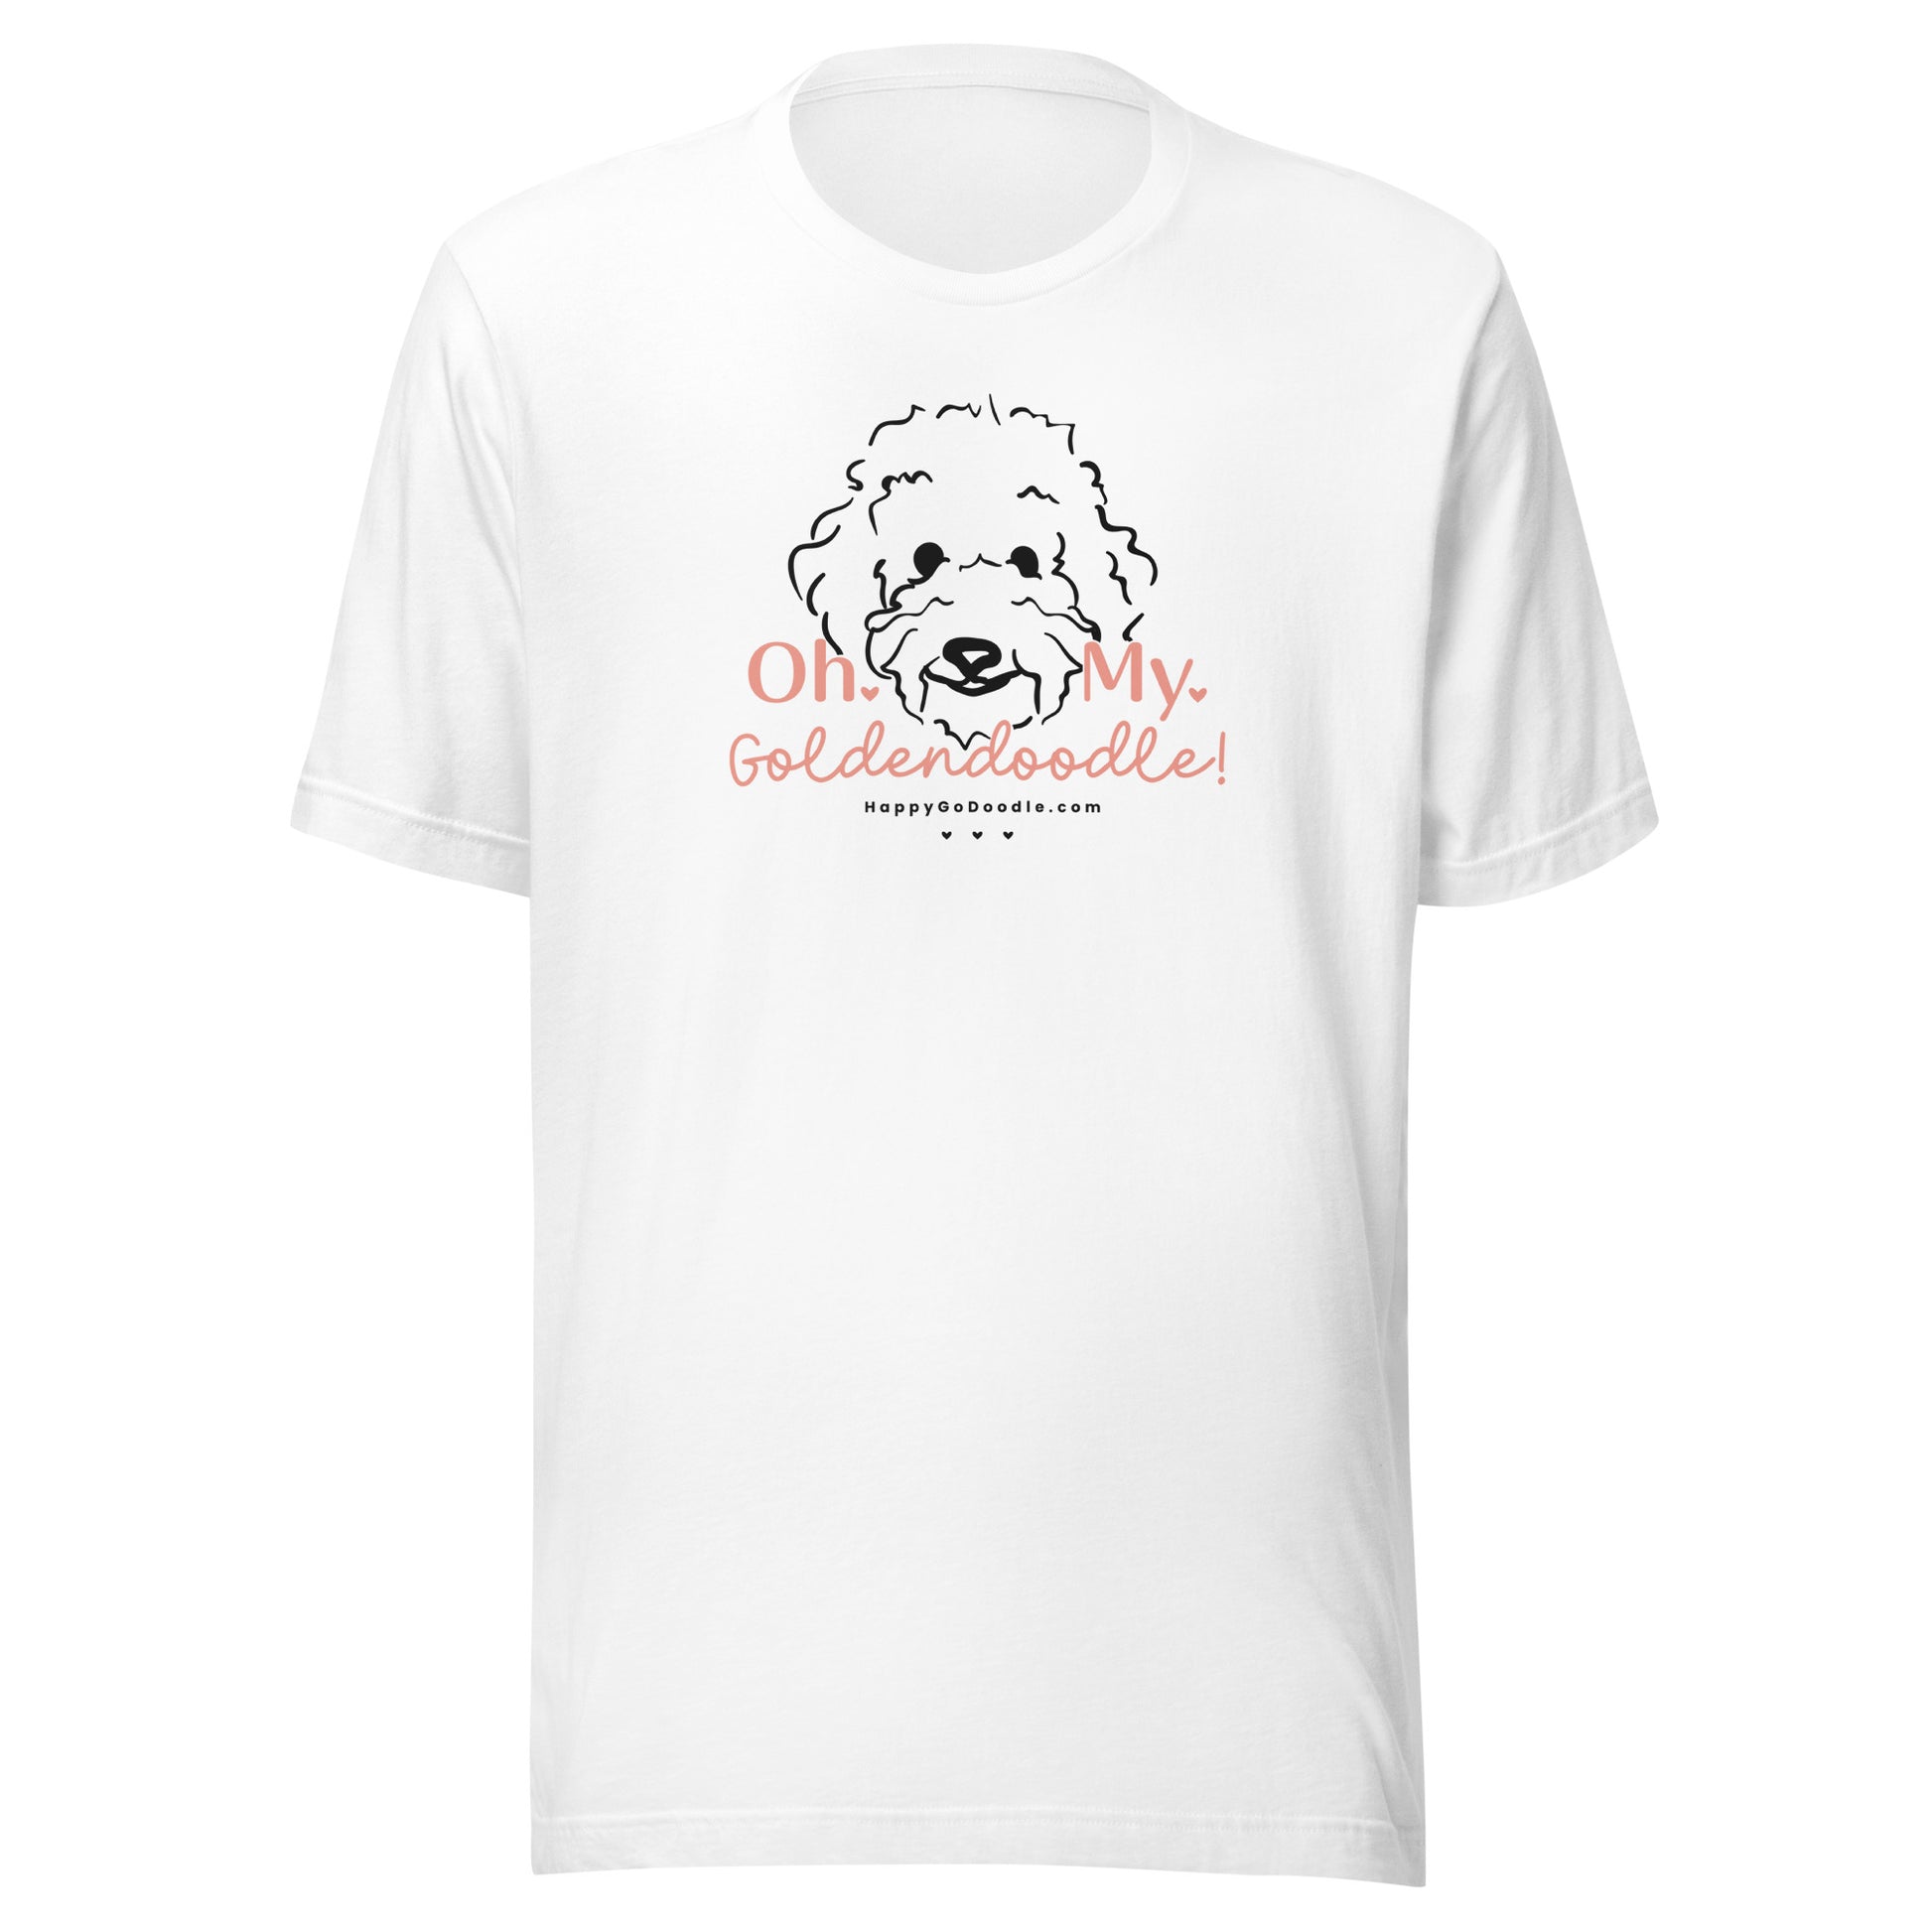 Goldendoodle t-shirt with Goldendoodle dog face and words "Oh My Goldendoodle" in white color